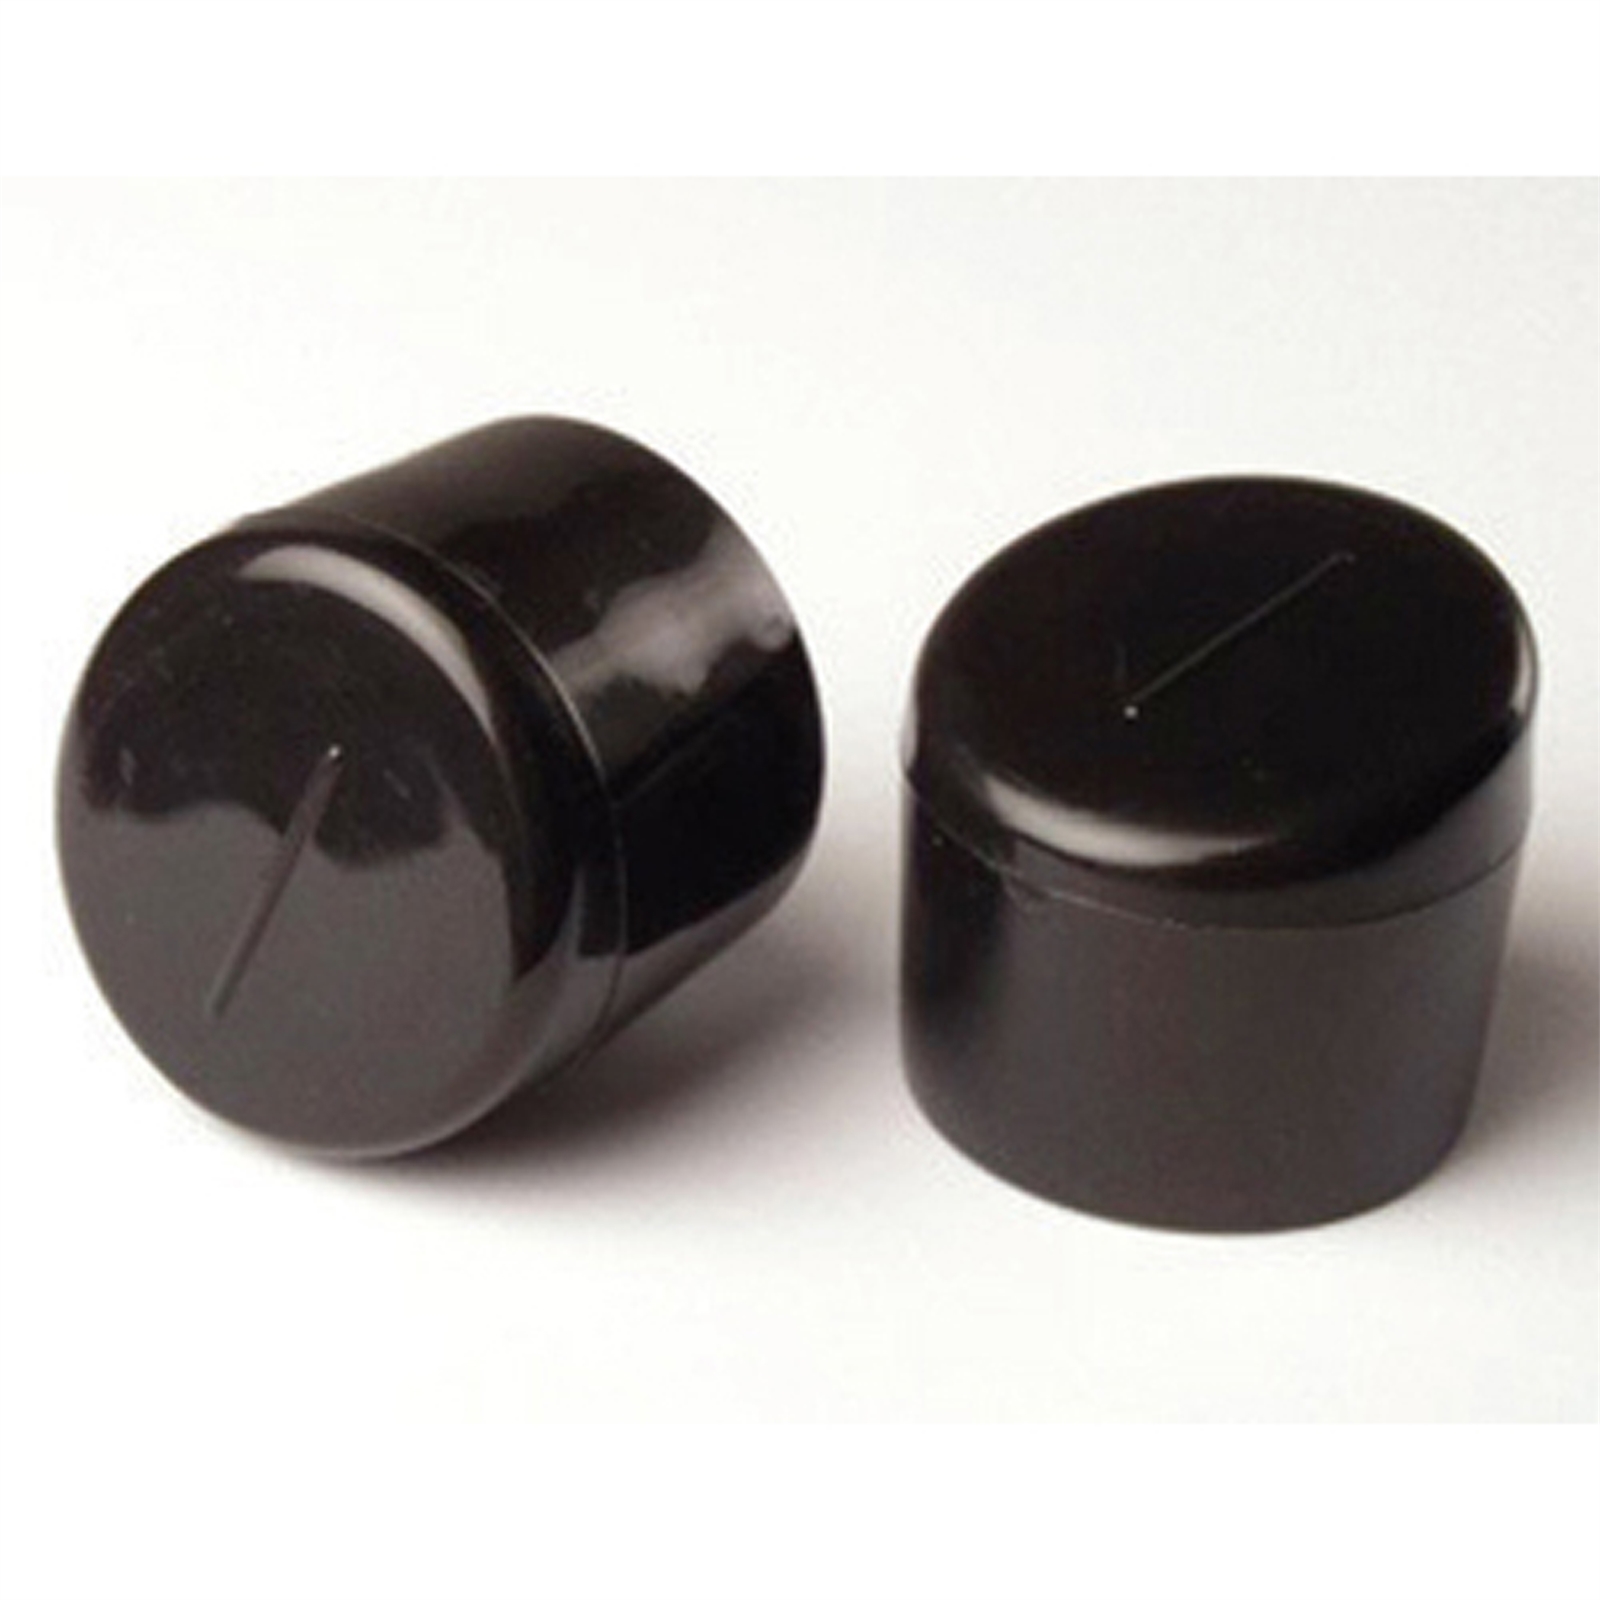 TIC 19mm Black Plastic Angled Ext Chair Tip - 4 Piece